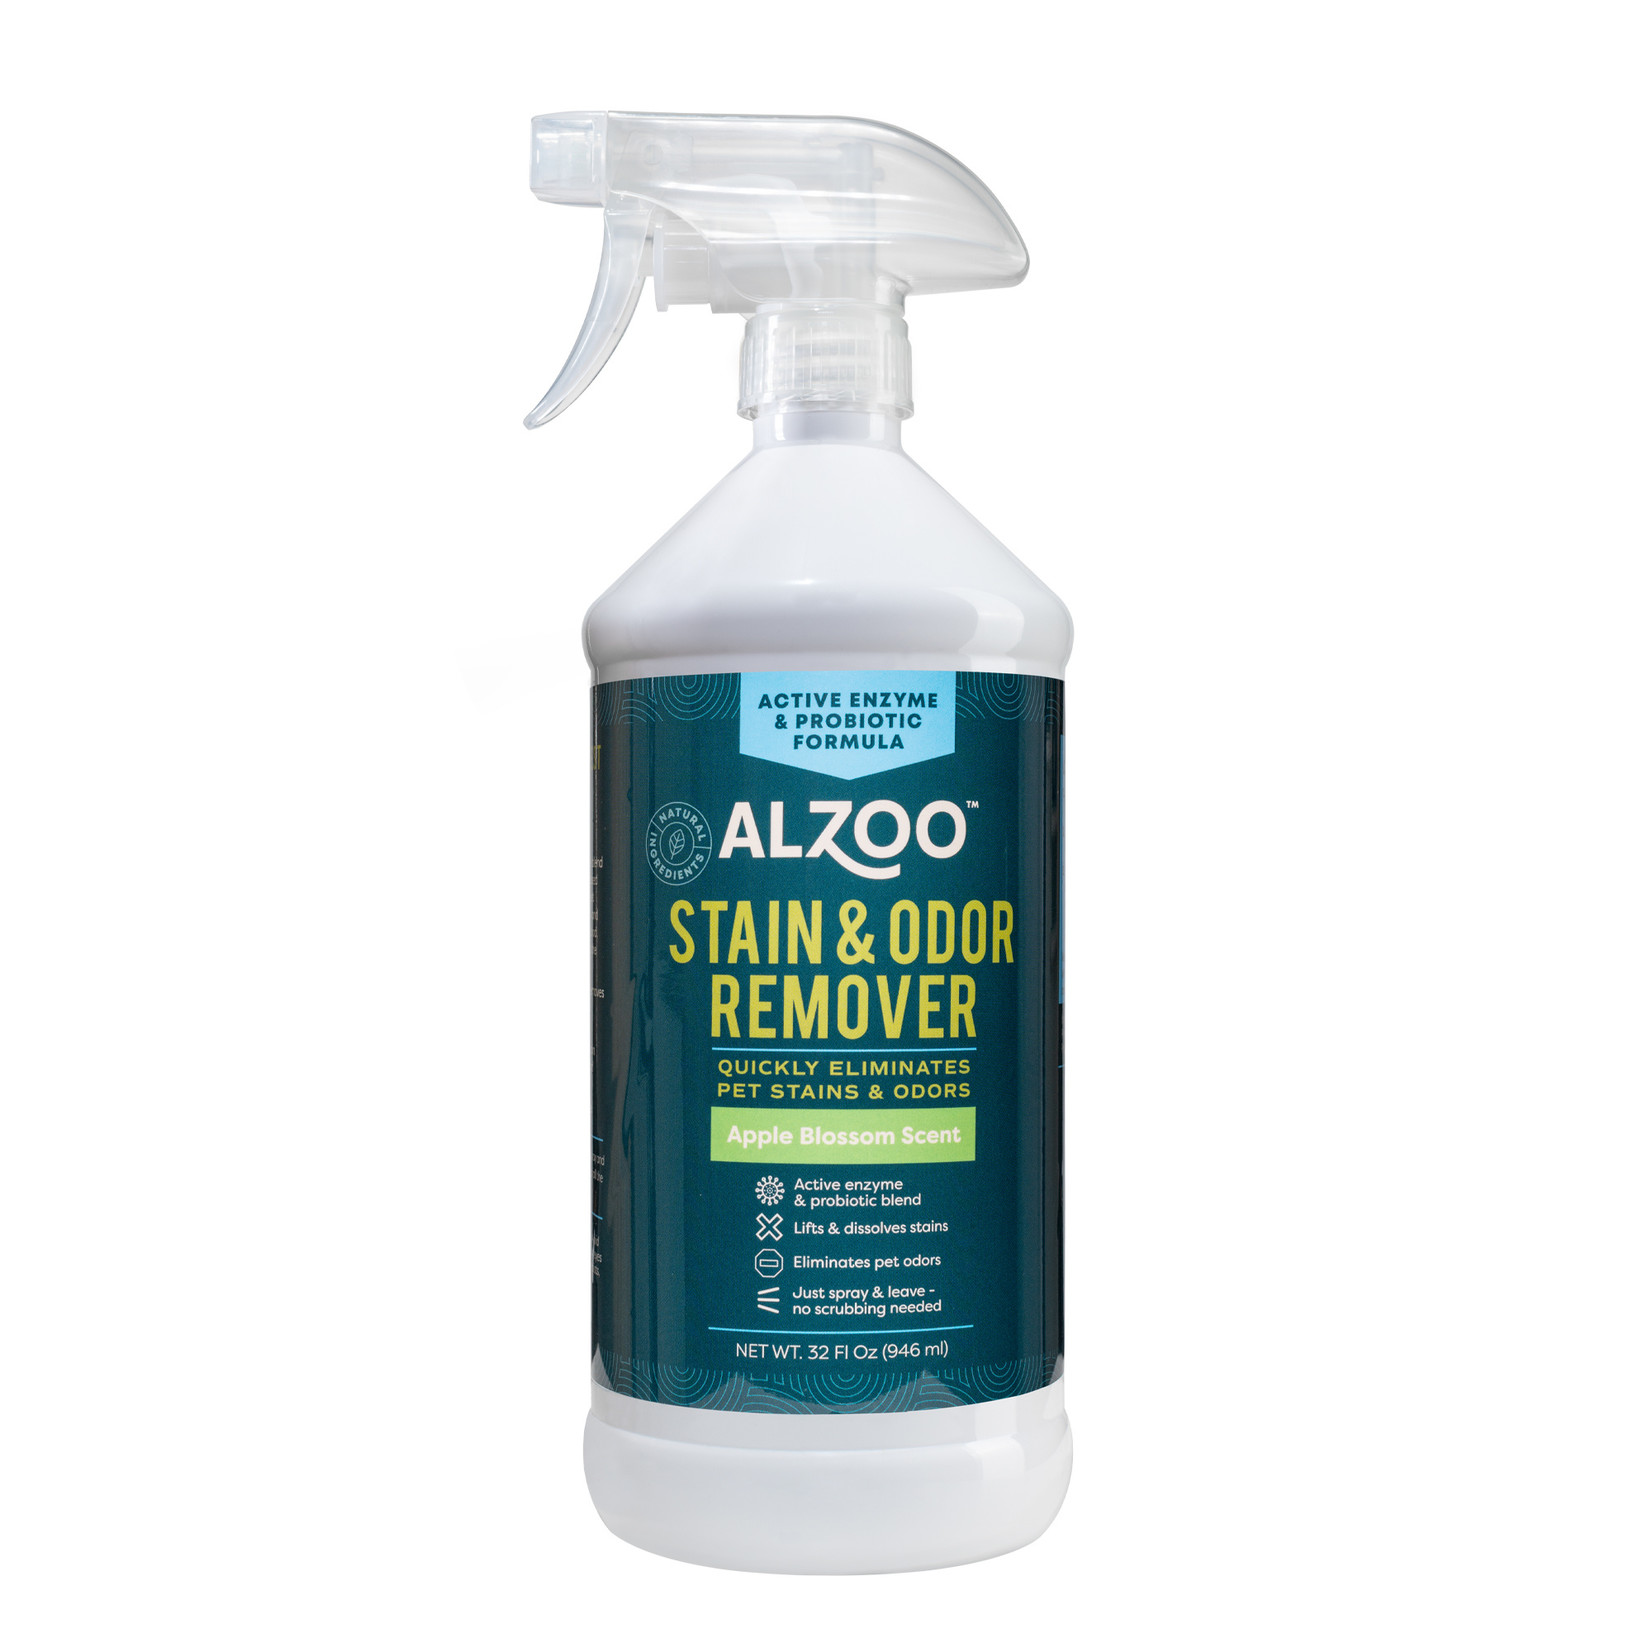 Pee-B-Gone Alzoo Pee-B-Gone Apple Blossom Scent Pet Stain & Odor Remover